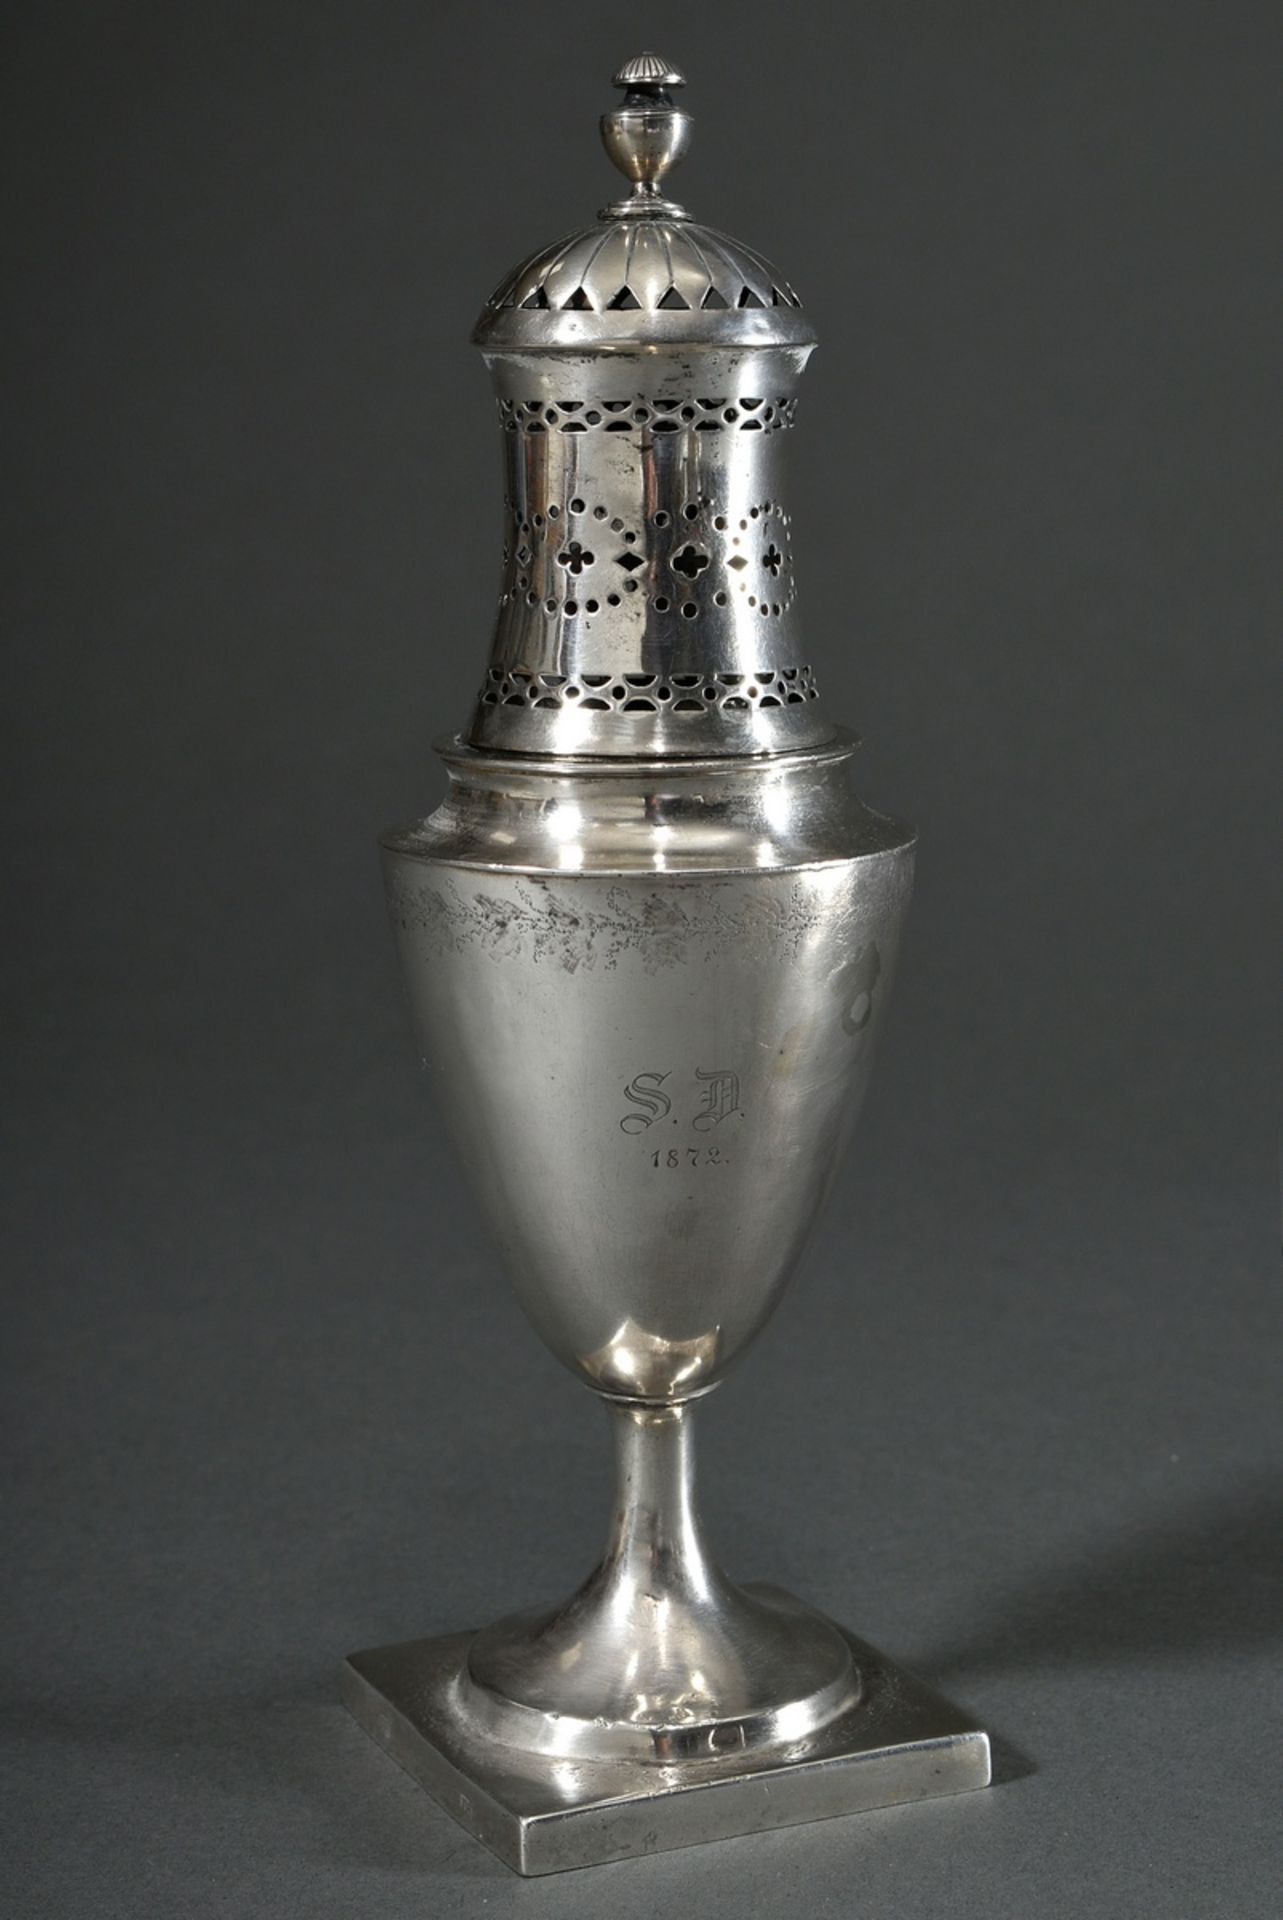 Classicist urn-shaped sugar sprinkler on a high, angular base with delicately engraved floral friez